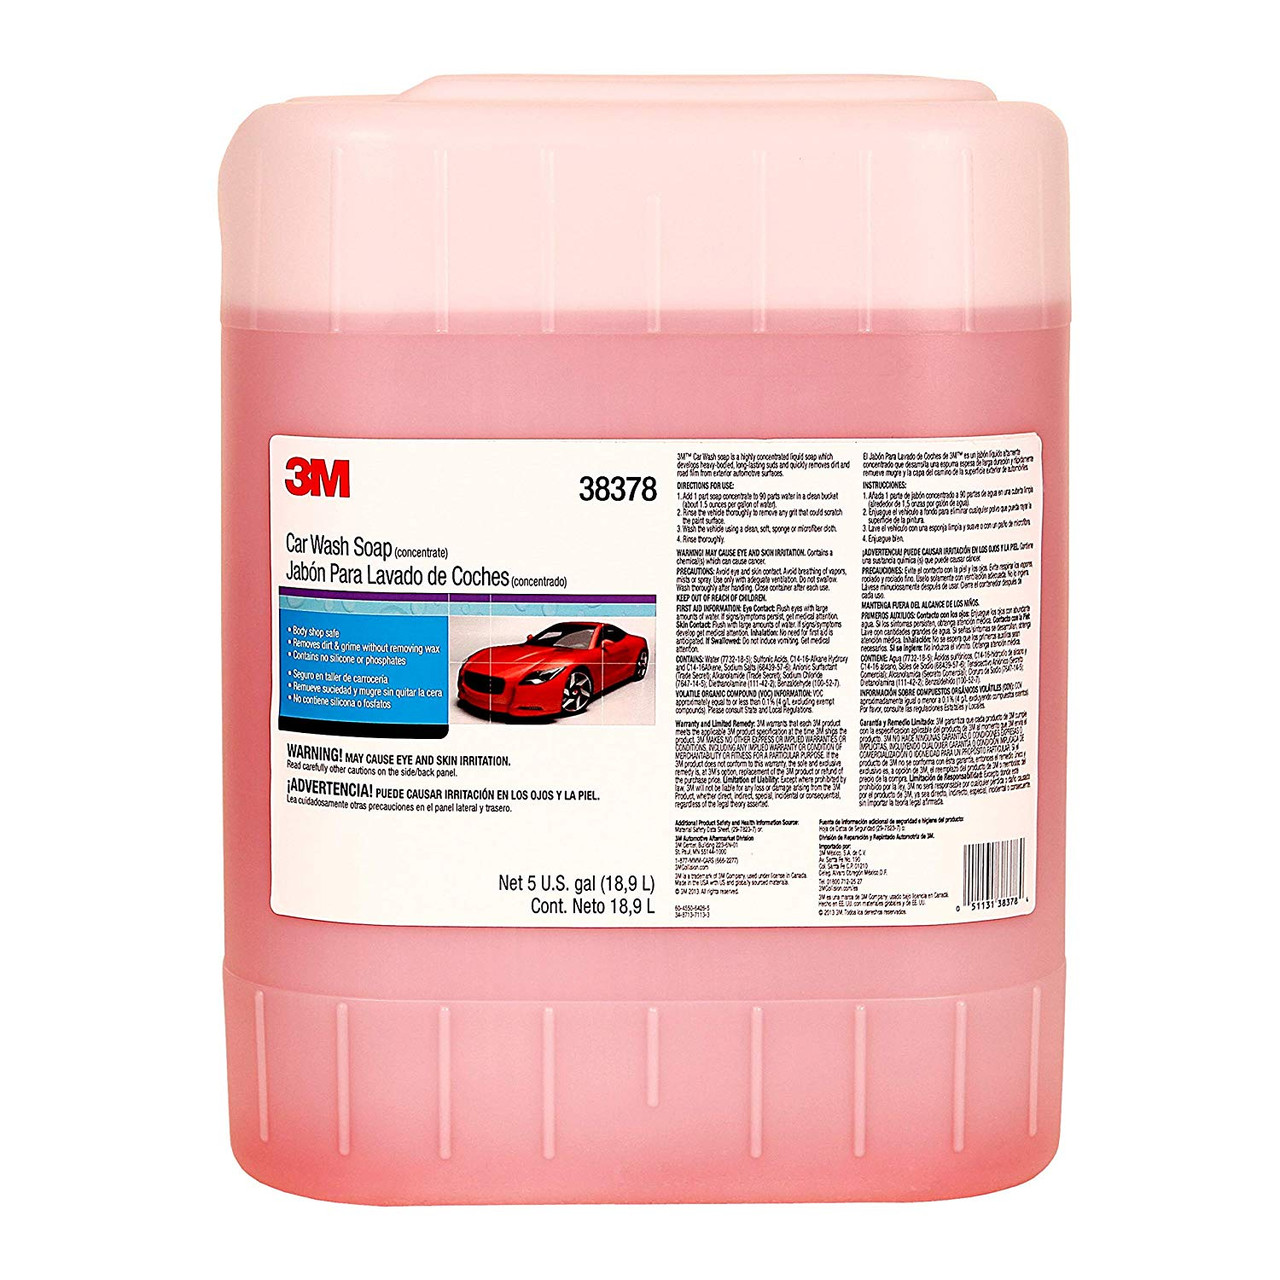 Chemical Guys CWS803 Clean Slate Wax-Stripping Wash, 1 Gal.